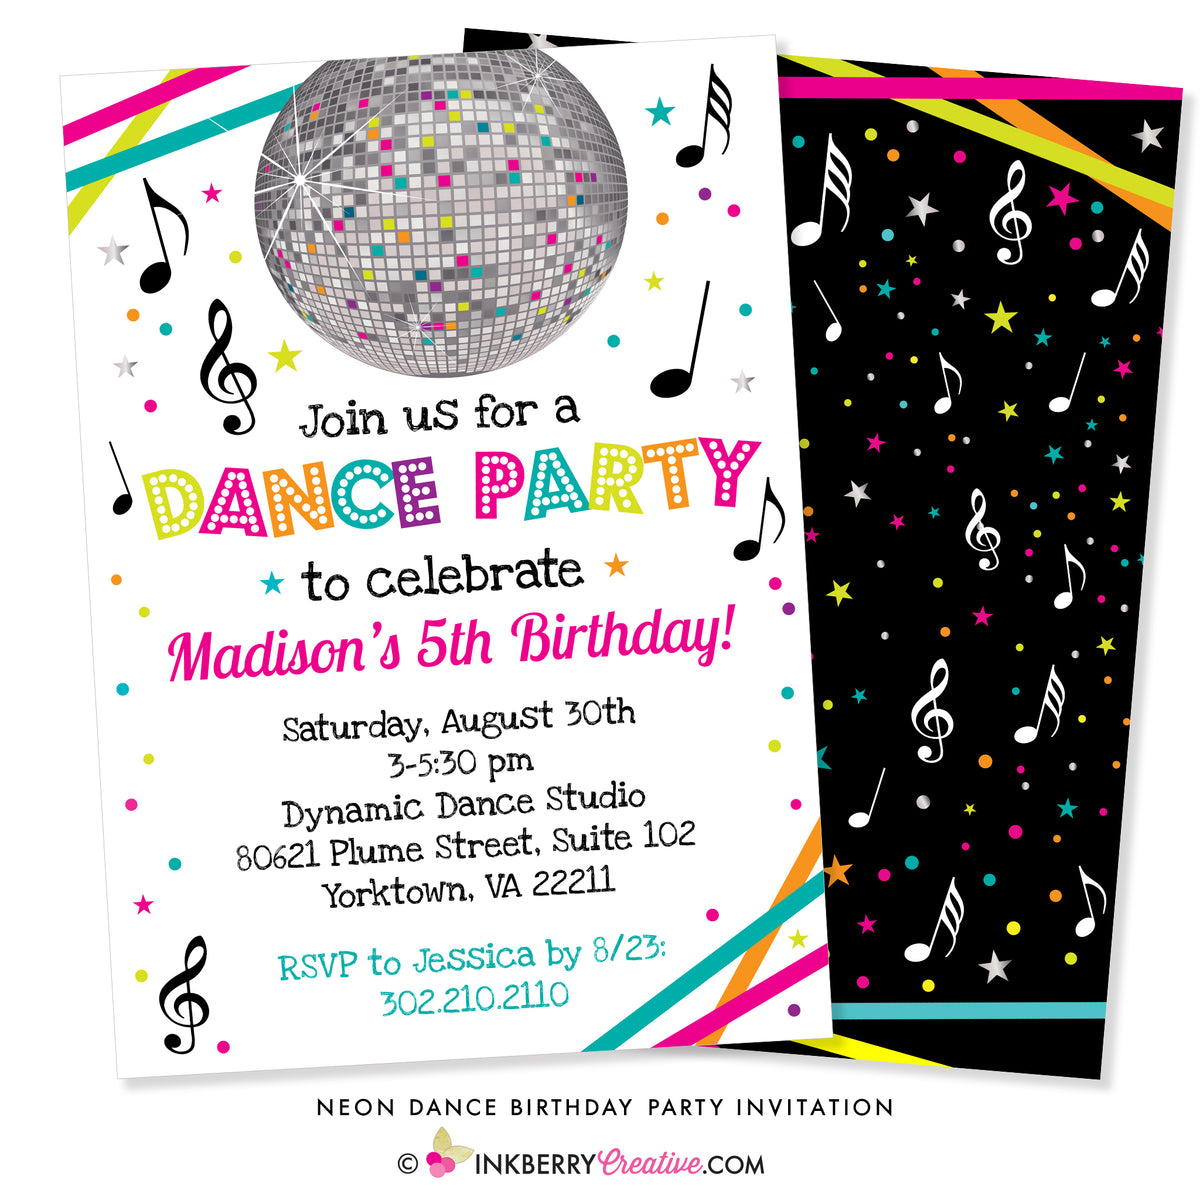 neon-dance-party-birthday-party-invitation-white-inkberry-creative